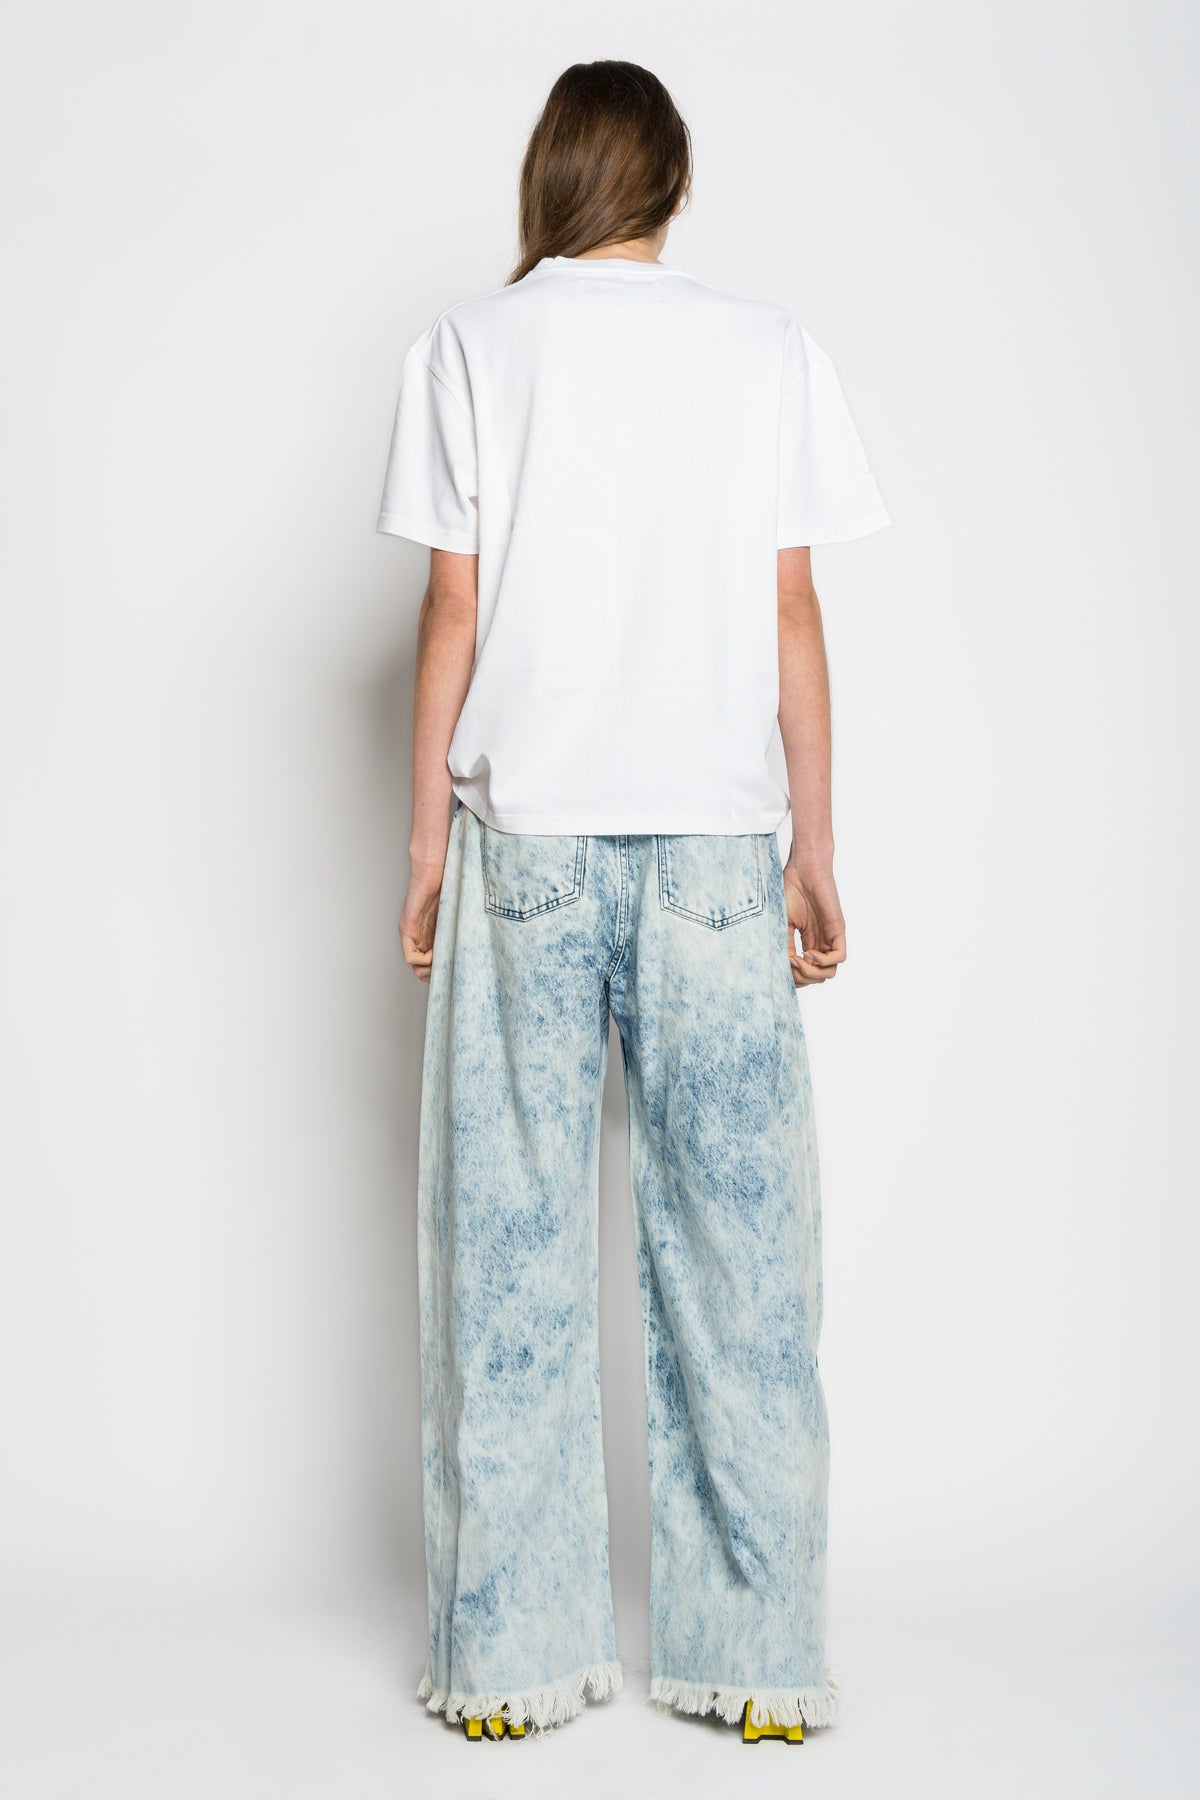 MARQUES ALMEIDA EMBROIDERED T-SHIRT